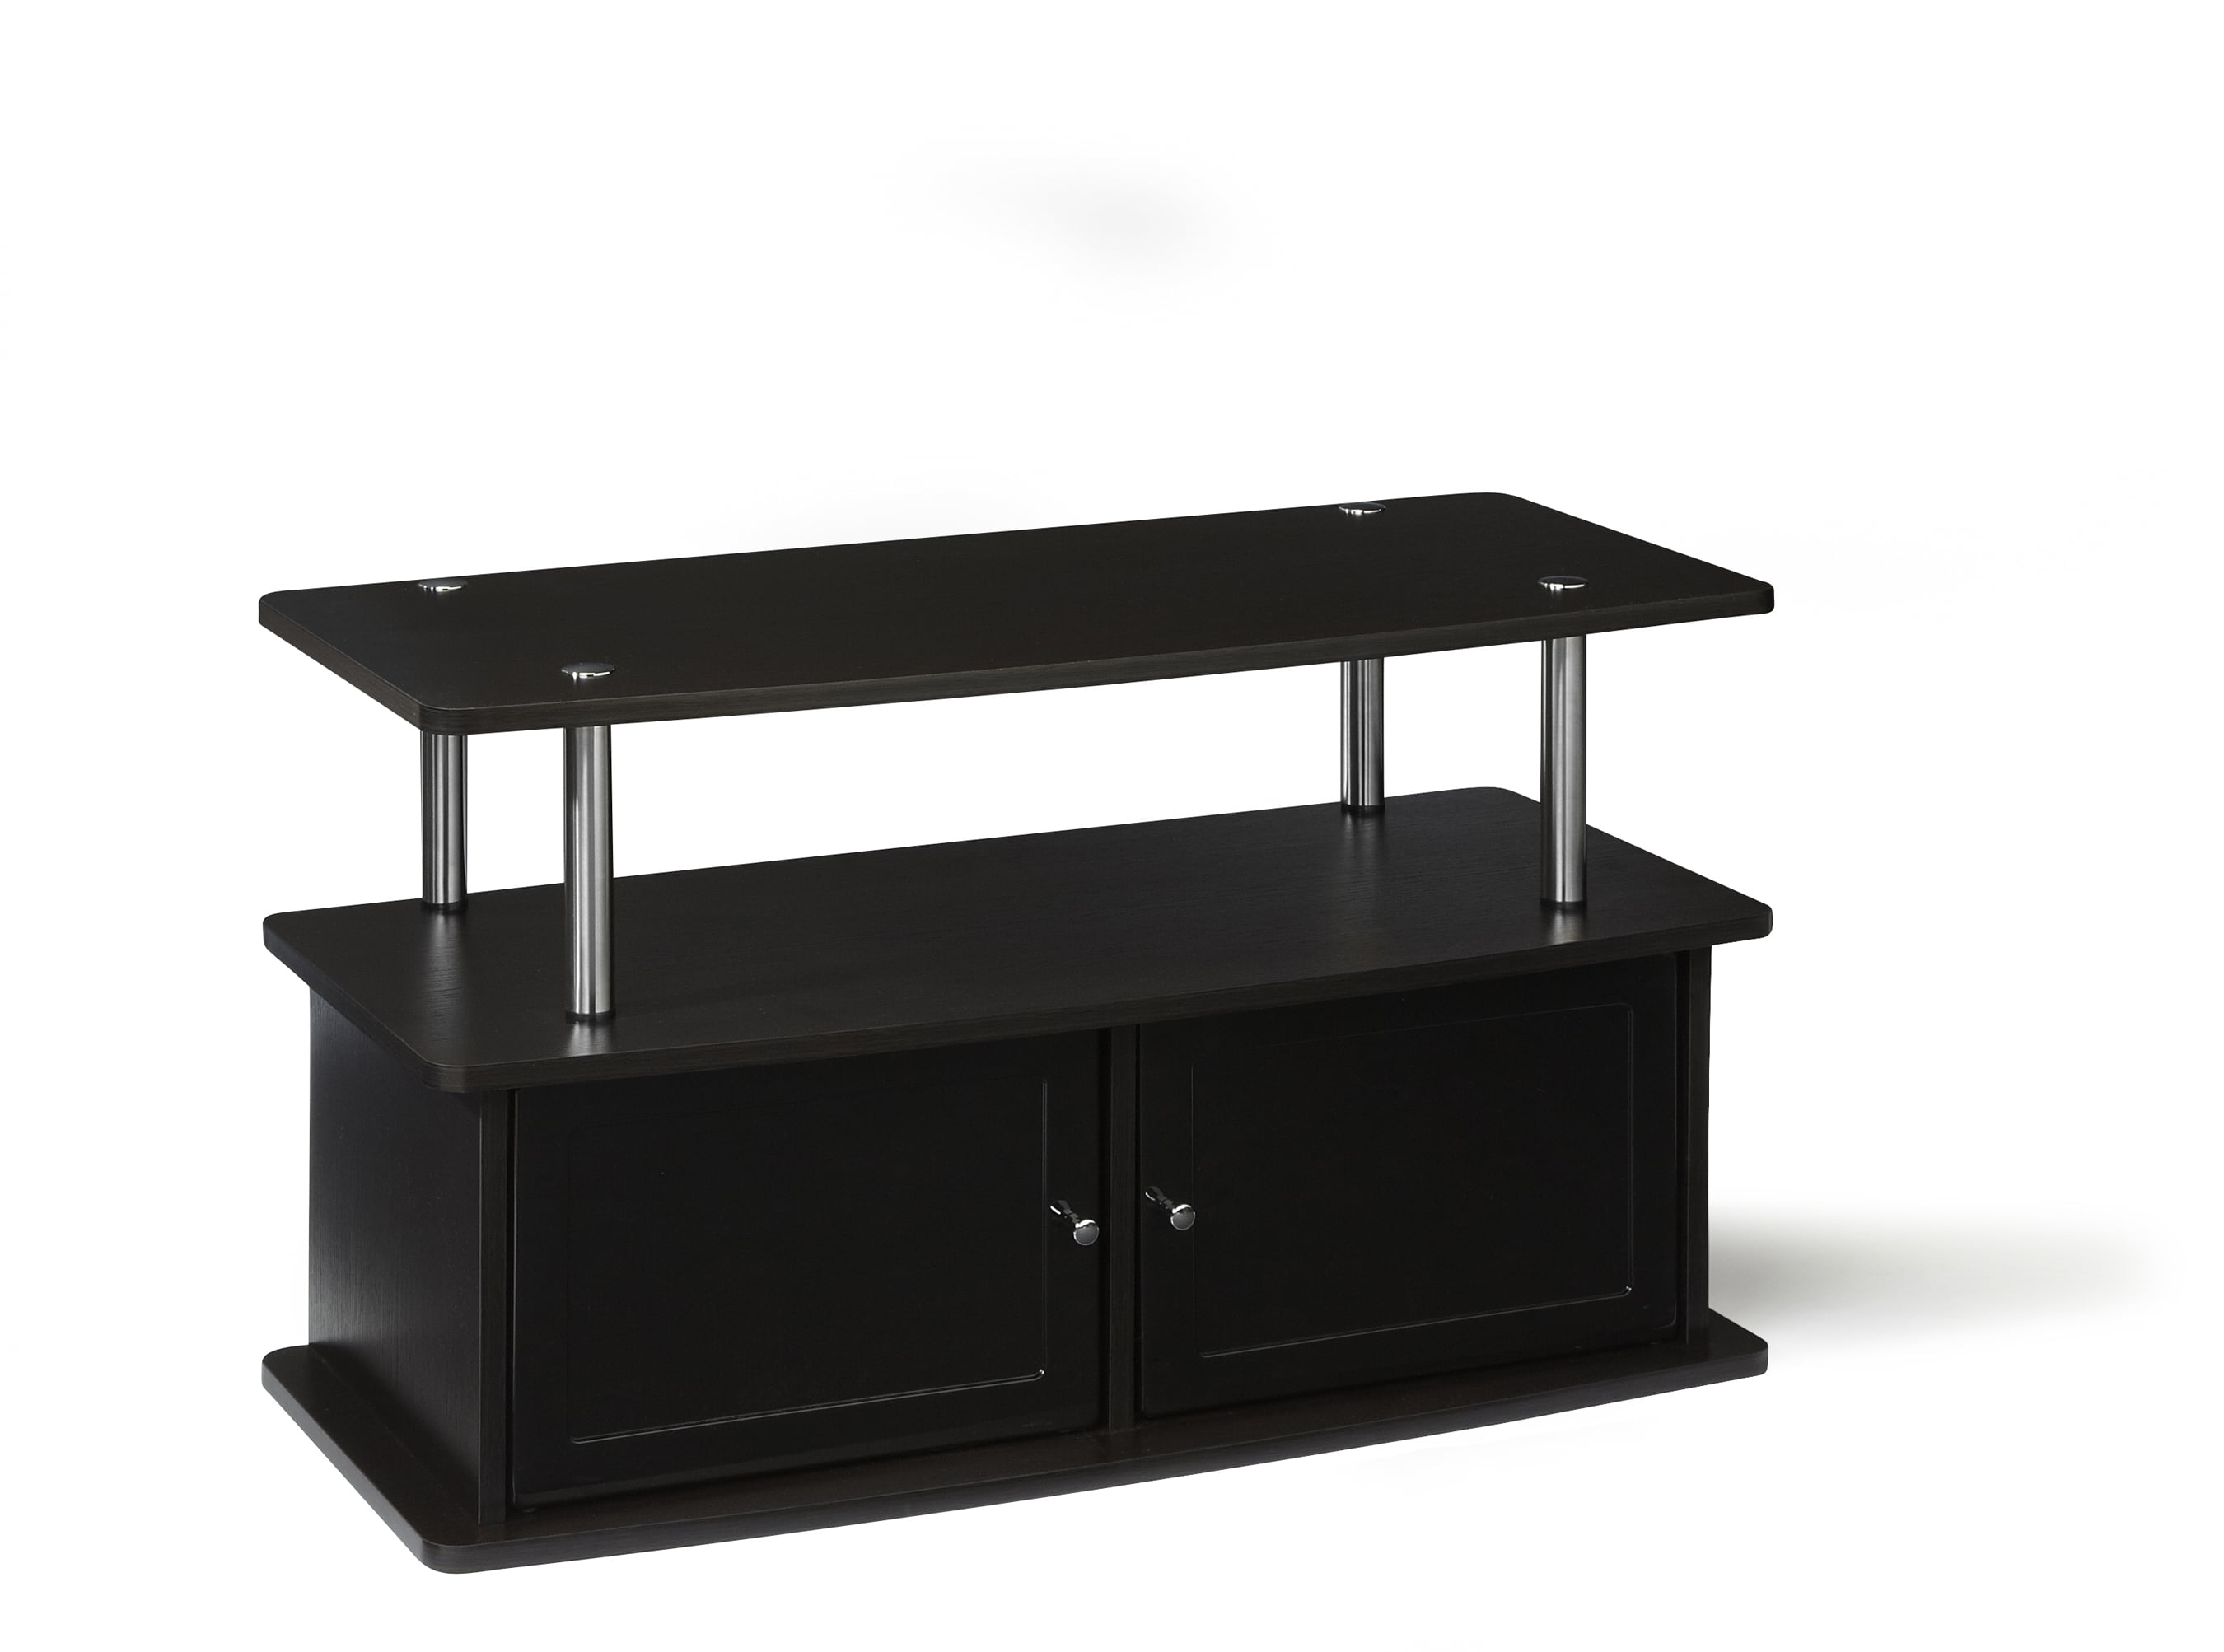 Designs2Go" TV Stand with Two Cabinets, for TVs up to 42", Espresso